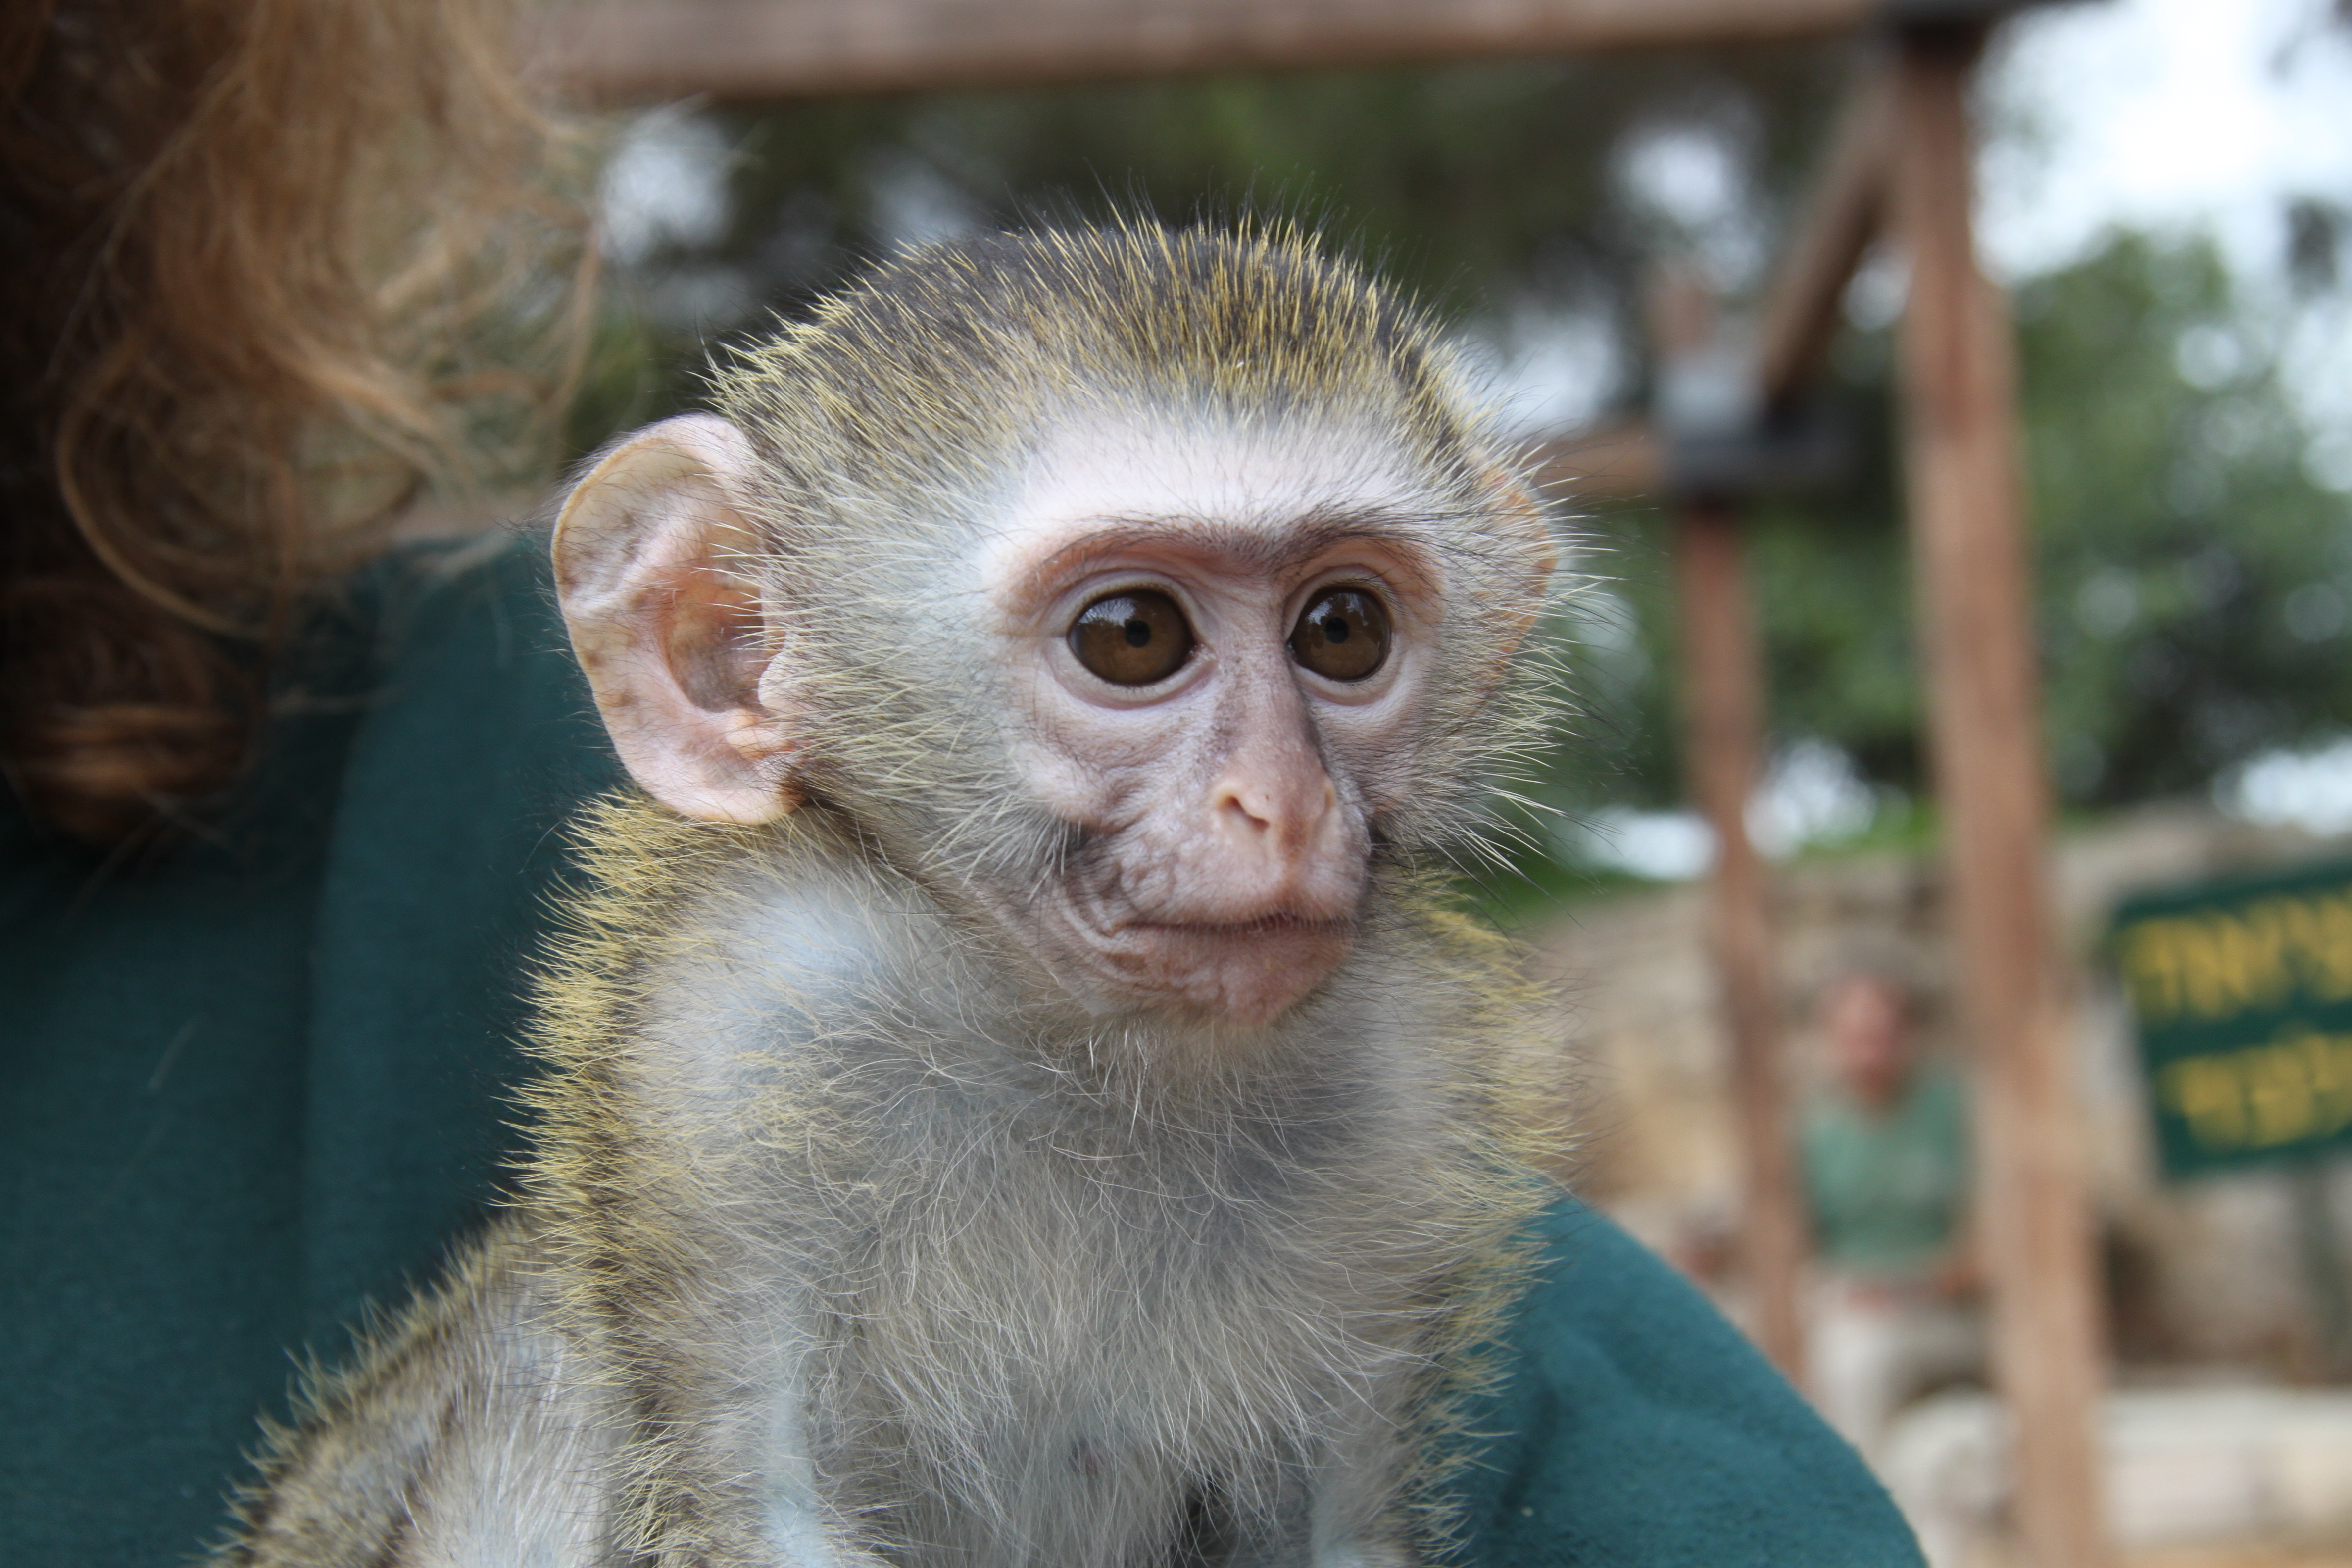 How to Share Building A New Home for Rescued Monkeys in